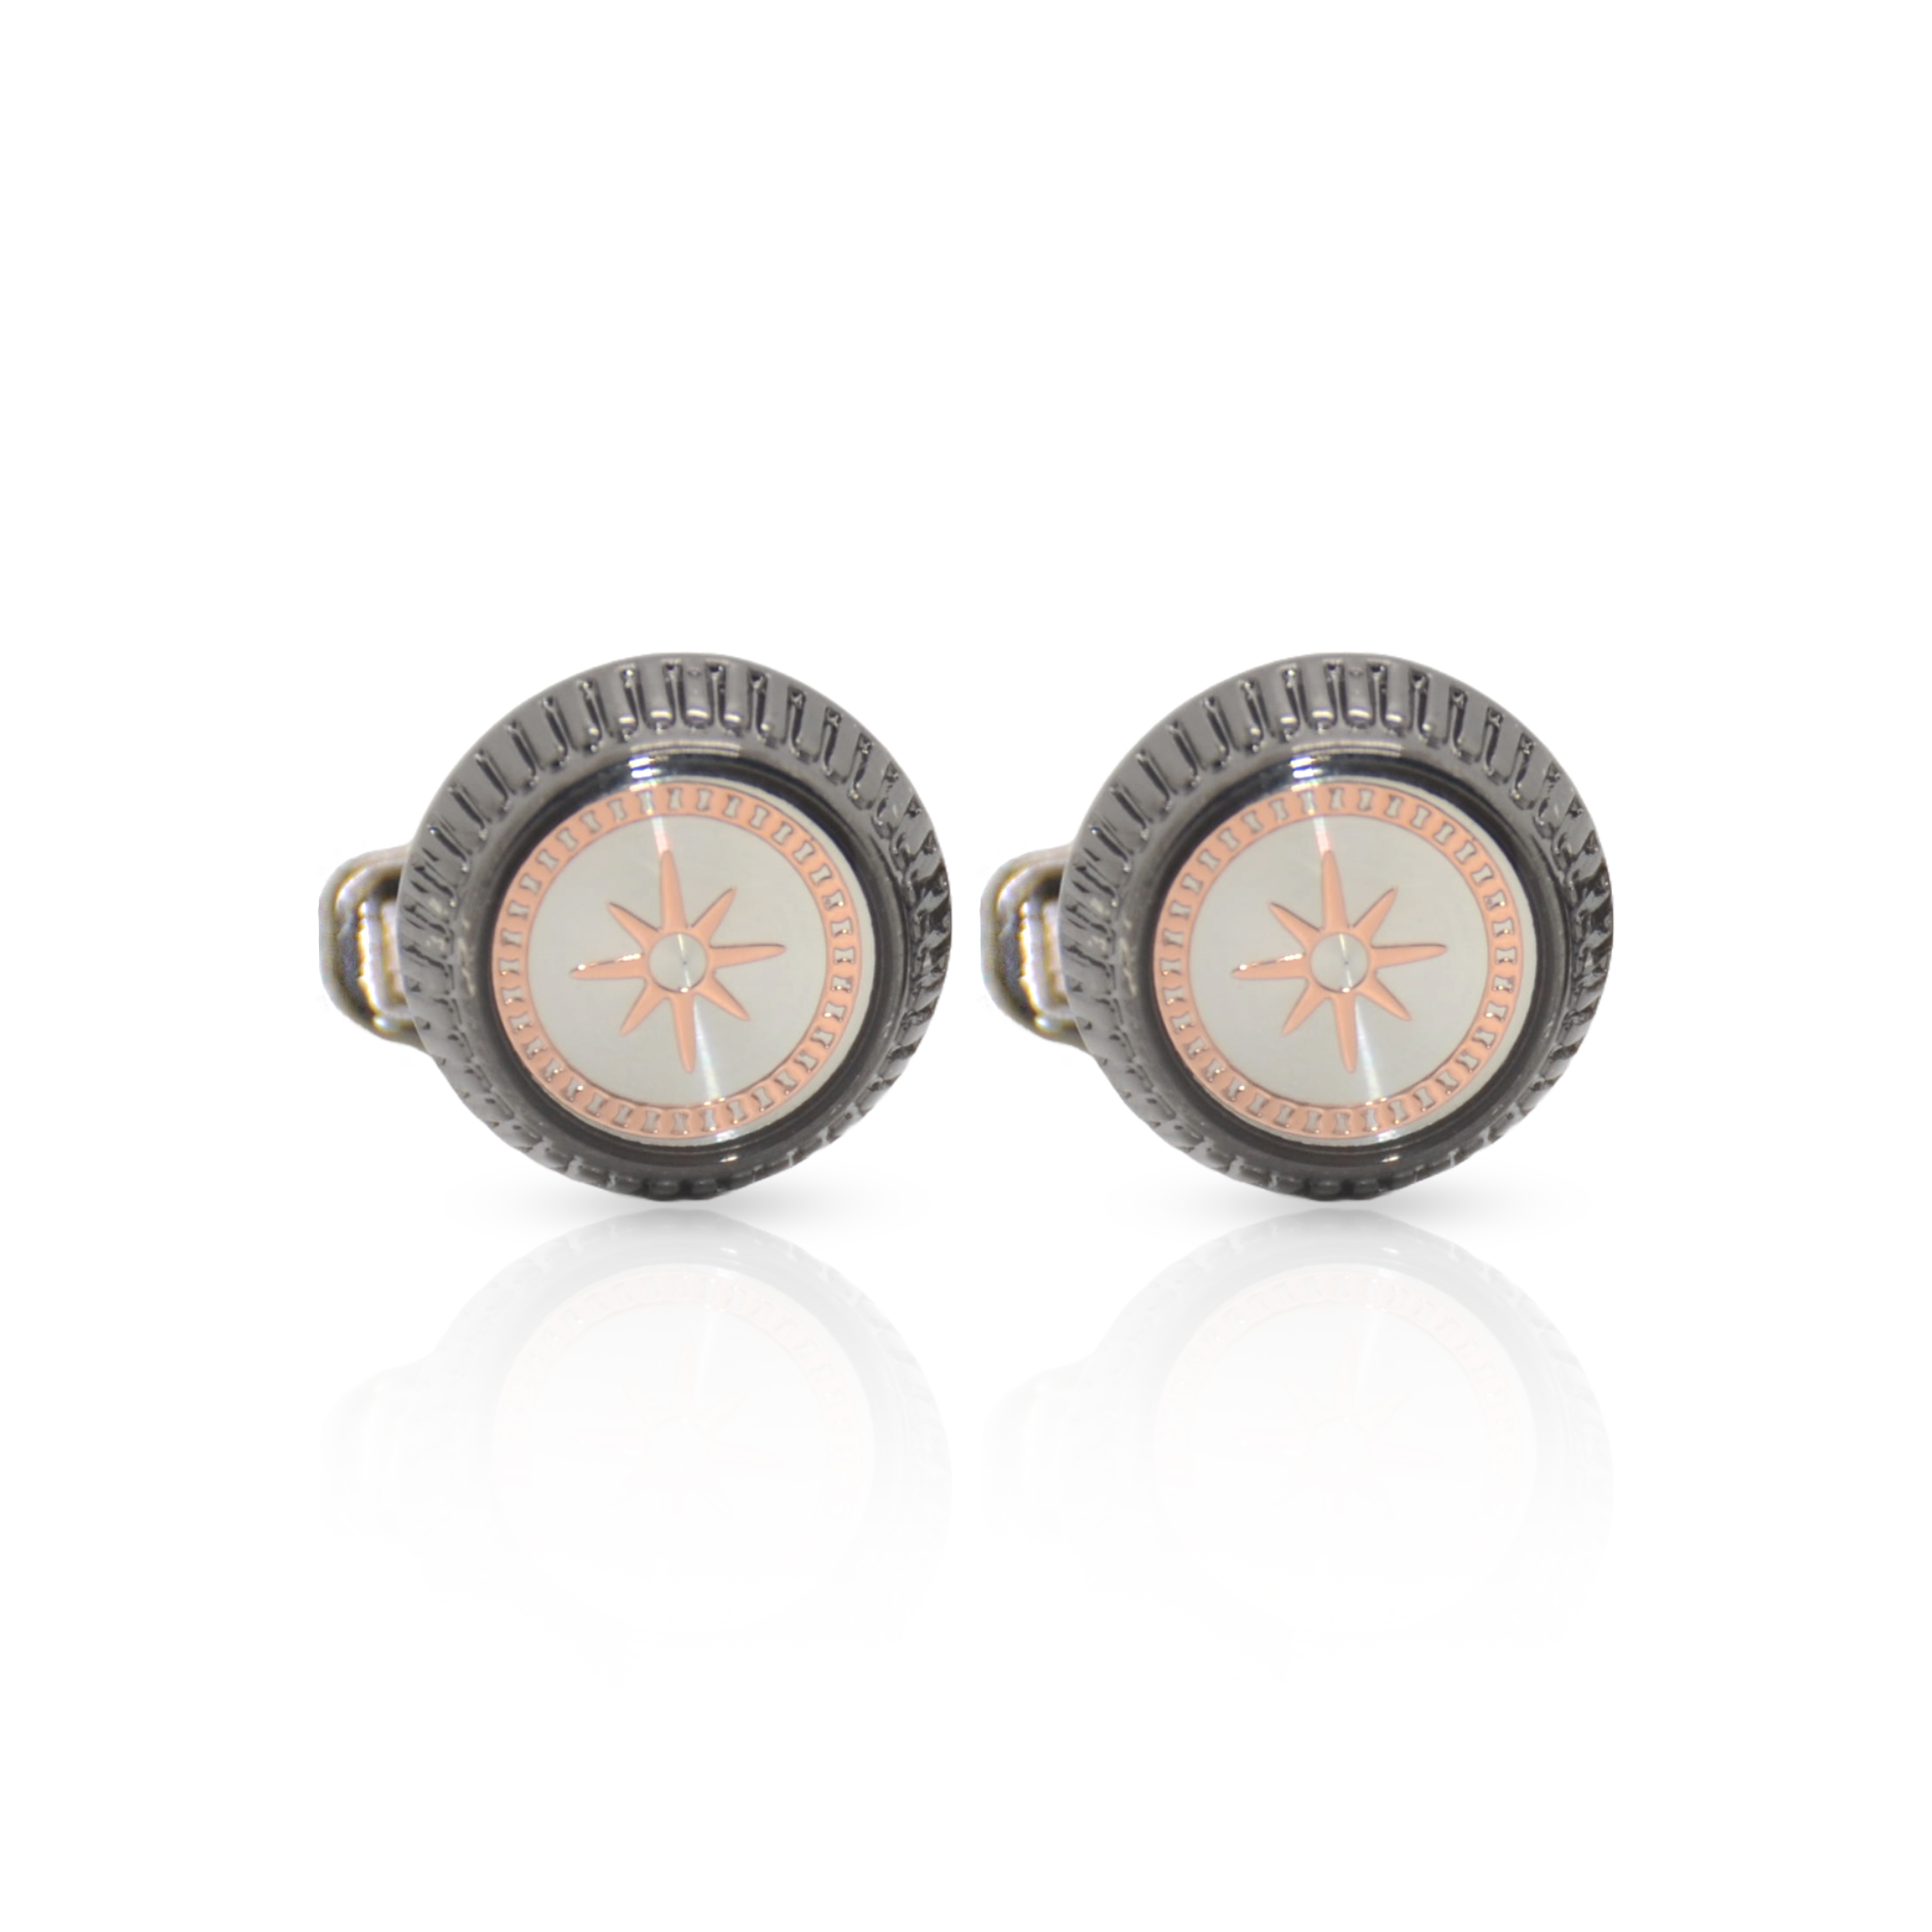 Cufflers Vintage Snowflakes Cufflinks – Model with Free Gift Box – CU-1027